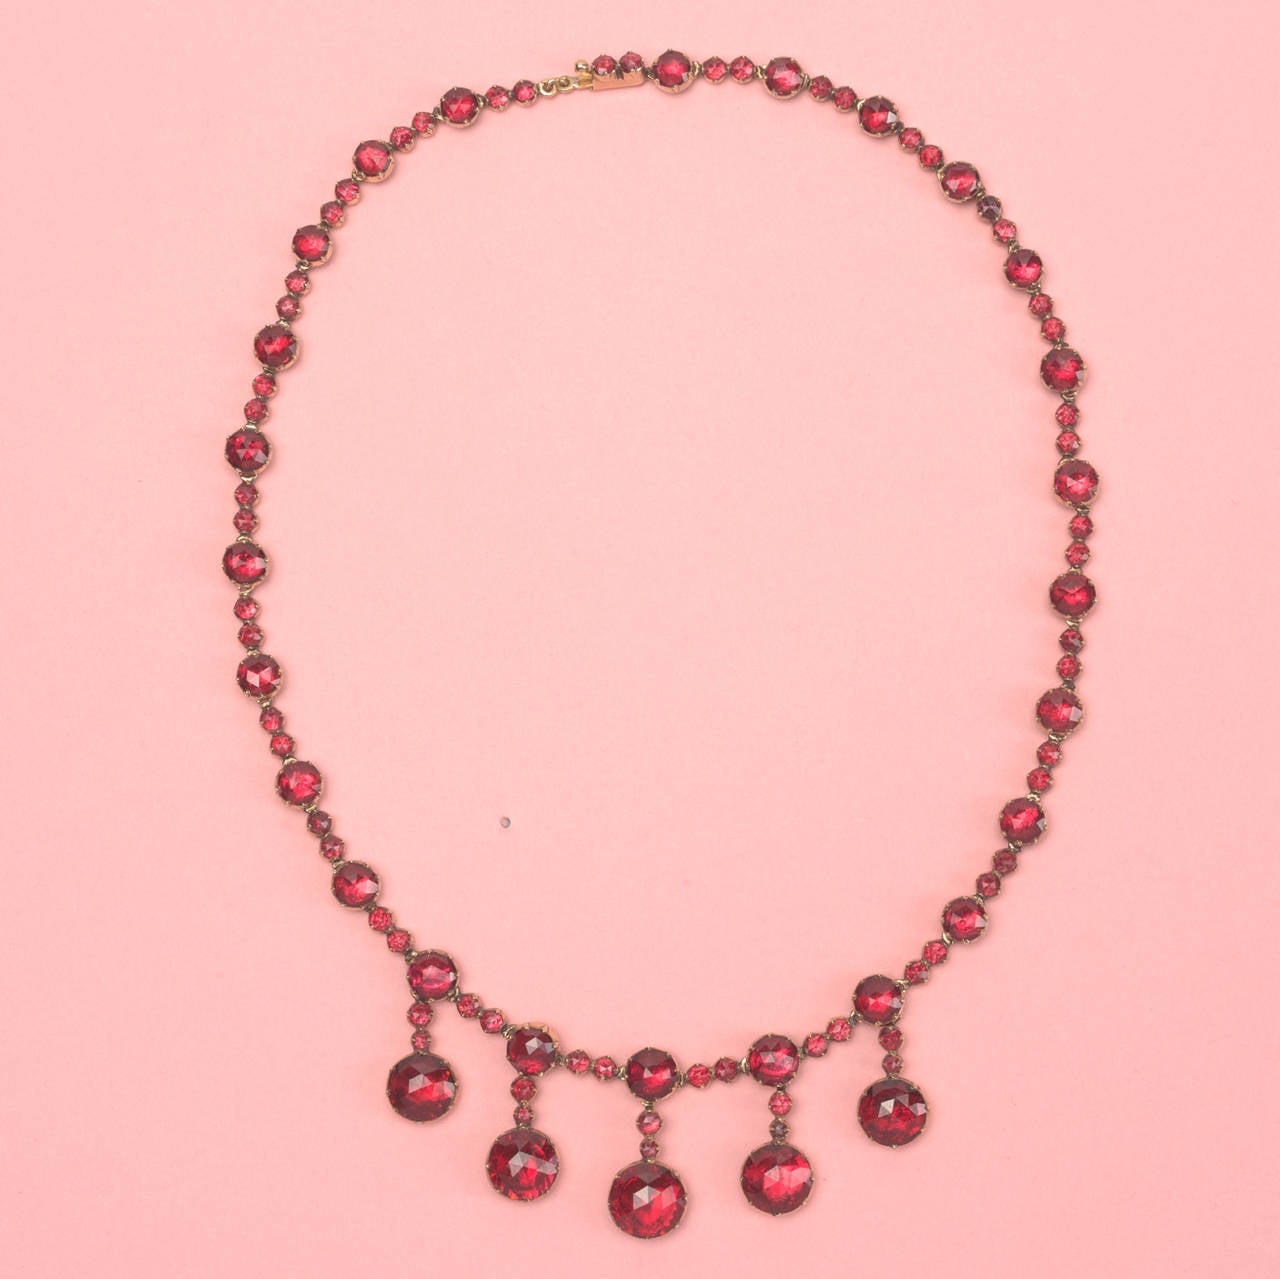 An 18 carat gold necklace with rose cut rhodolite garnets set on red pinkish gold foil. Five larger rose cut garnets suspend from the necklace, South of France, 19th century.

weight: 27.3 grams
length: 40 cm.